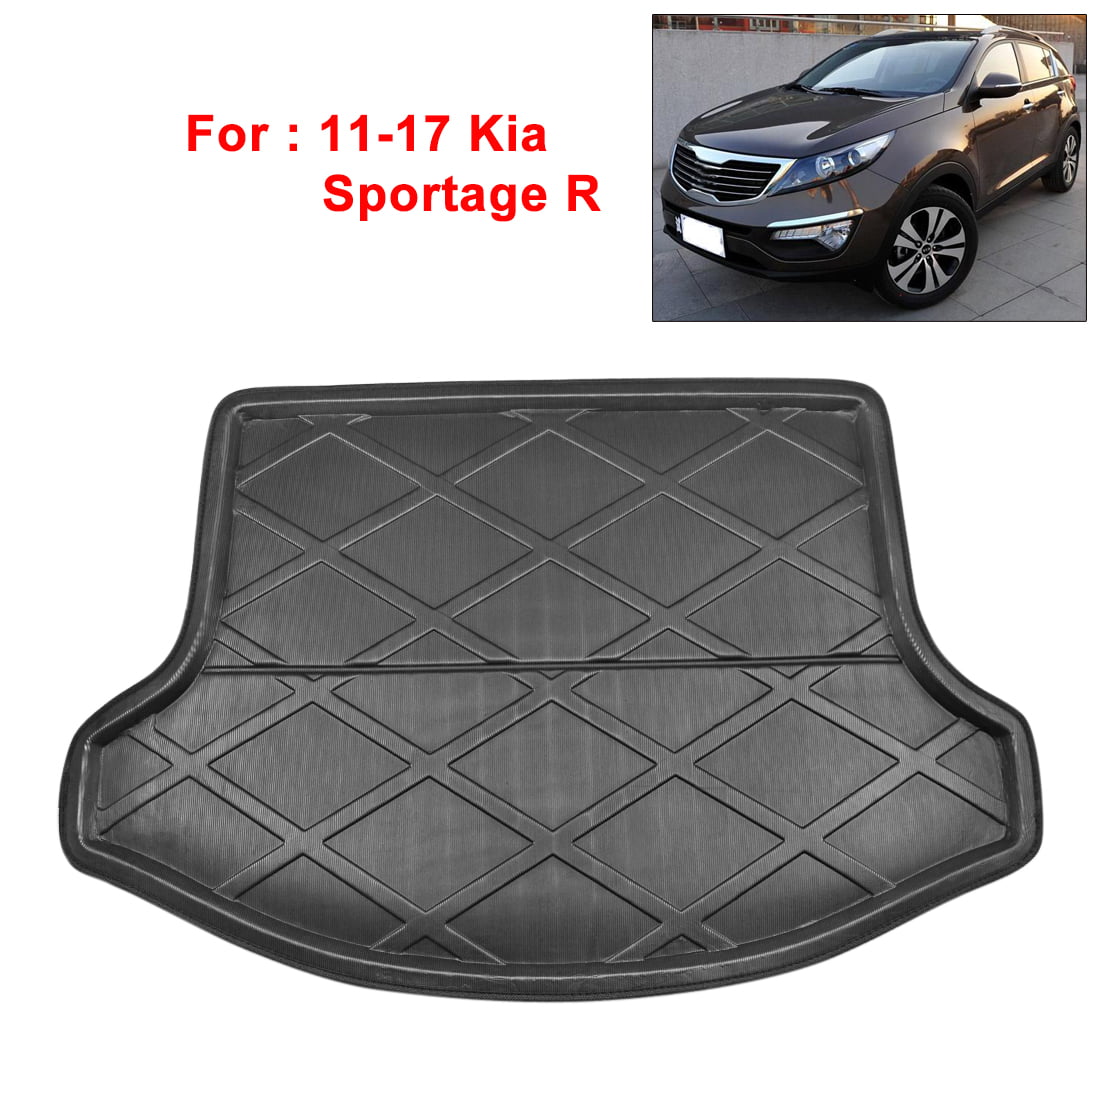 X AUTOHAUX Black Rear Trunk Boot Liner Cargo Mat Floor Tray for Kia Sportage R 11-17 